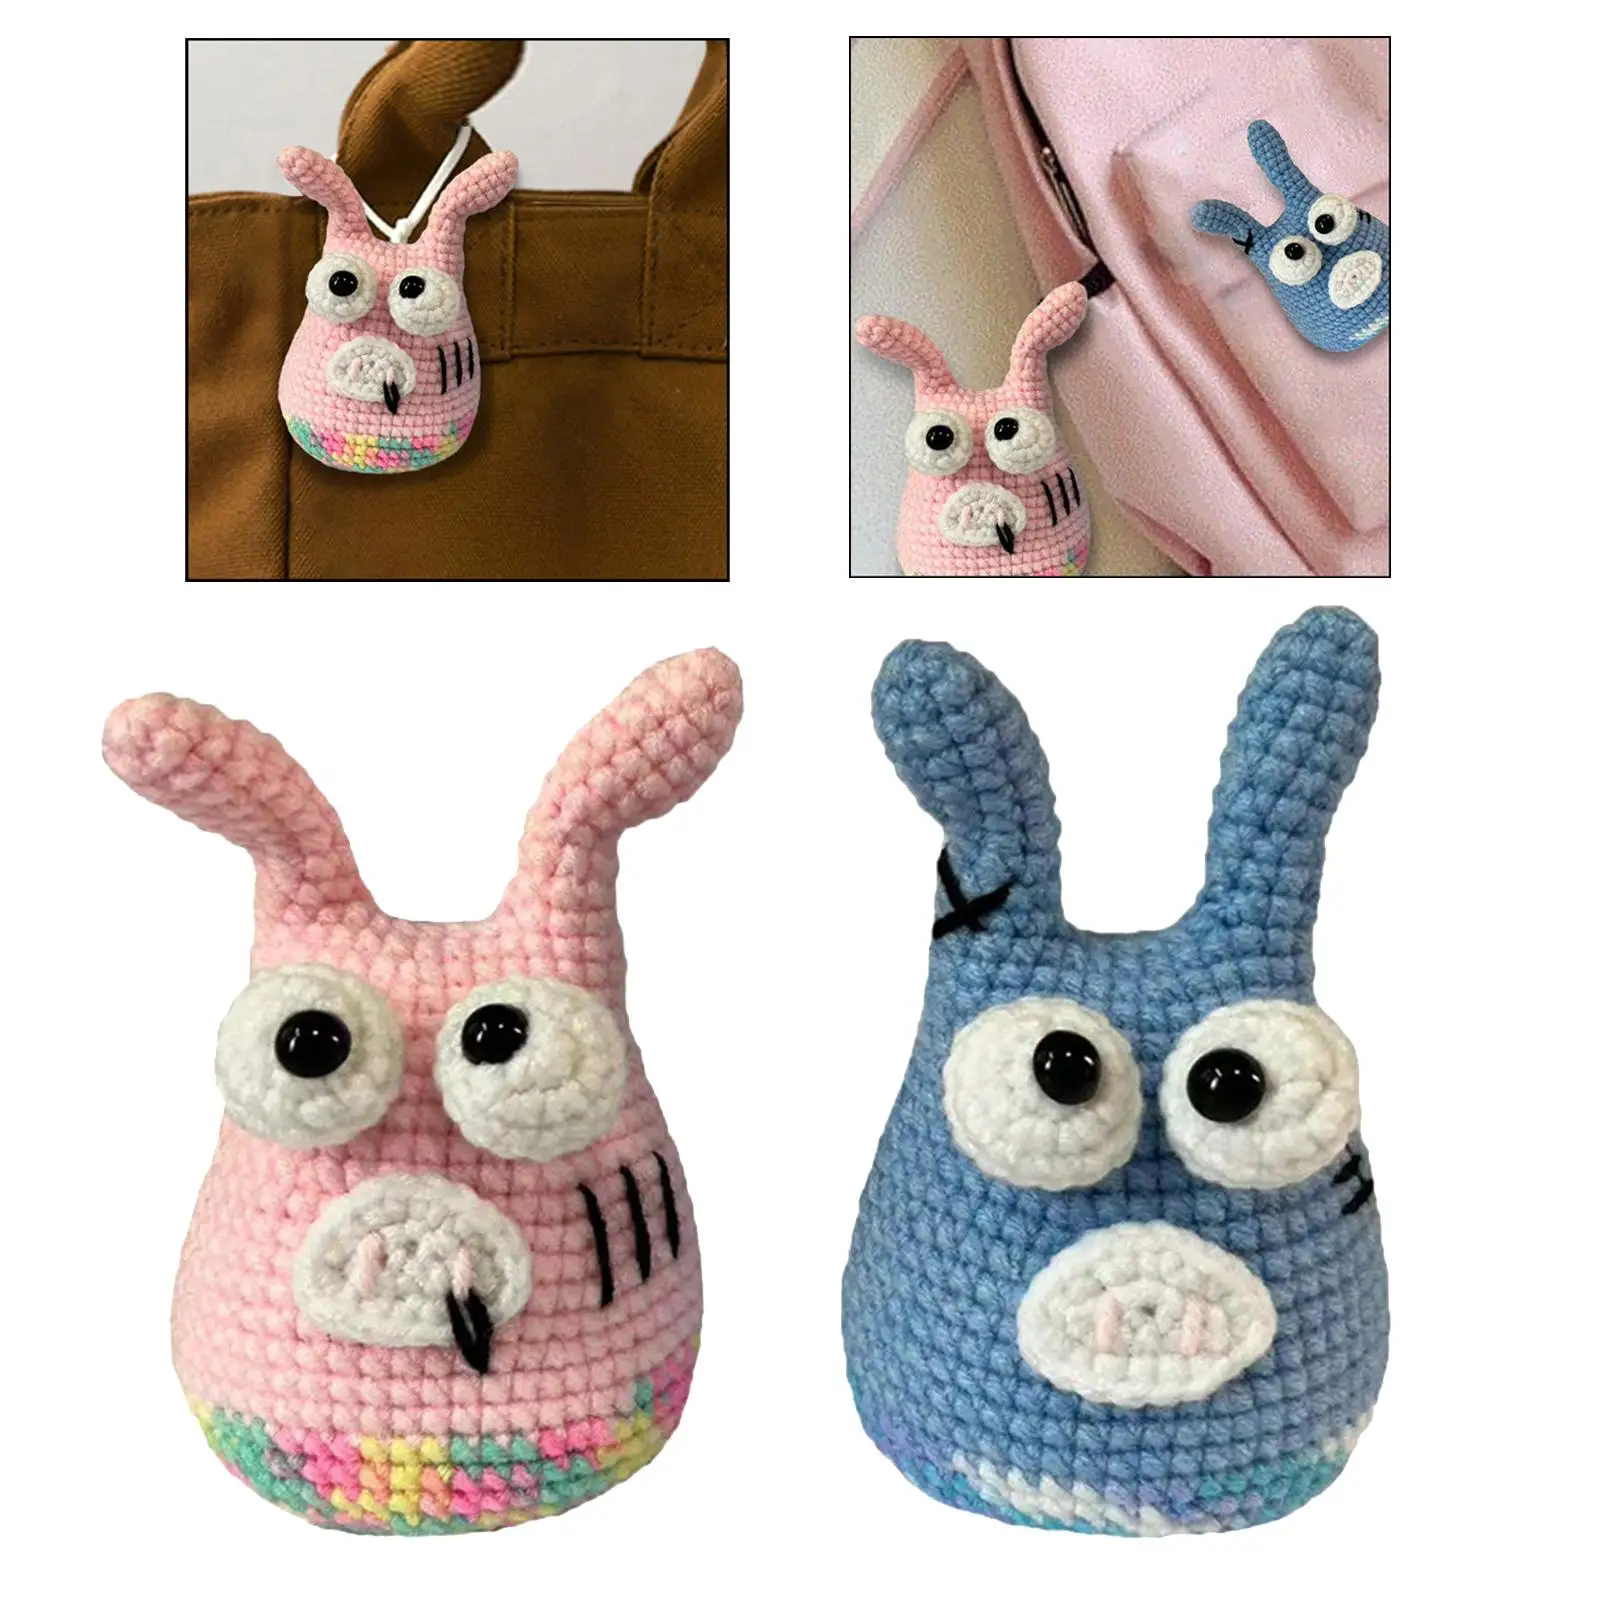 Crochet Animal Kit Crocheting Craft with Crochet Accessories Pig Doll Complete Material Pack for Knitting Lover Kids Adults Gift